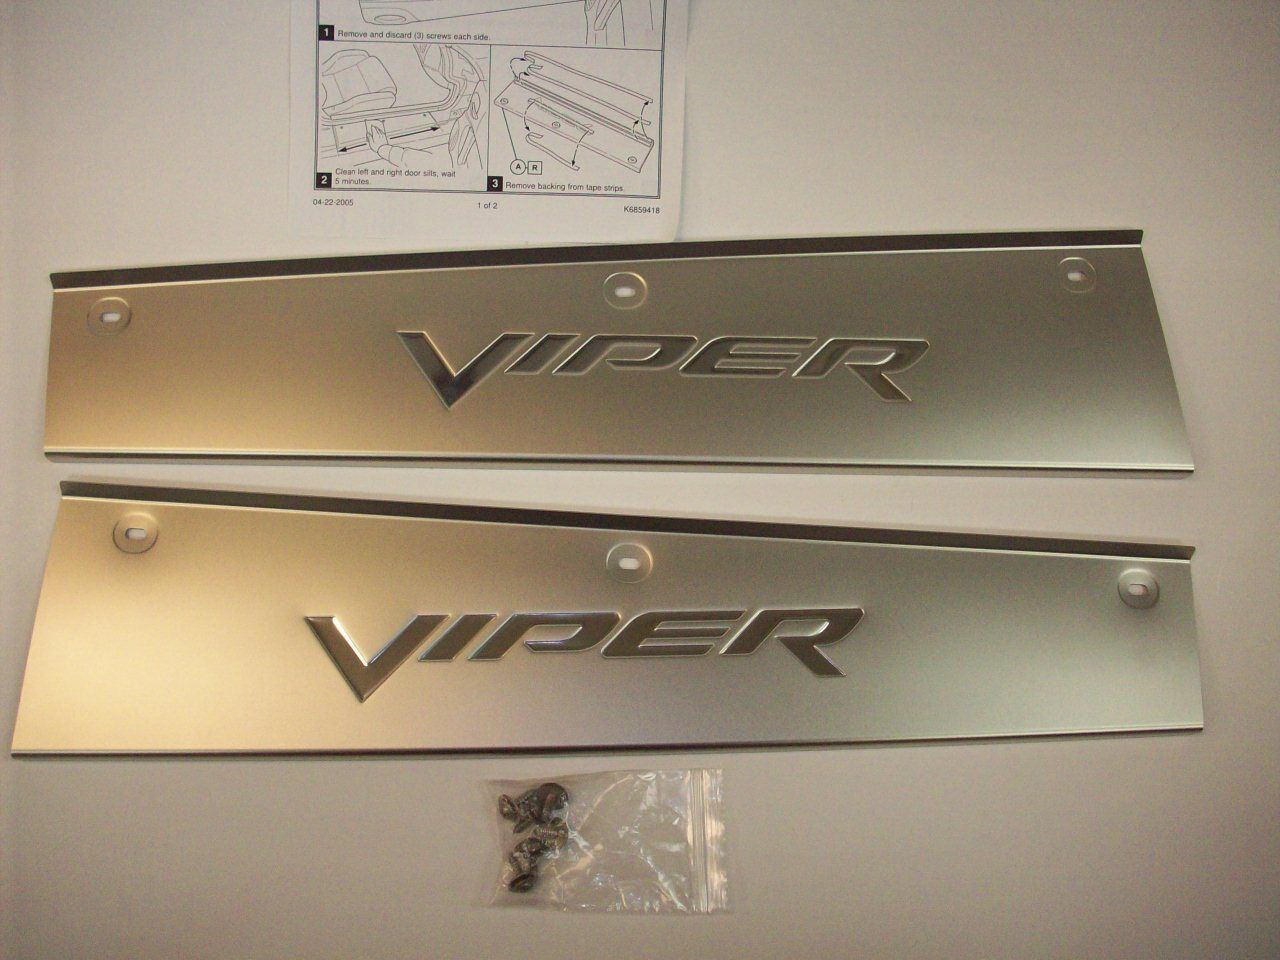 04-16 Dodge Viper Stainless Steel Door Entry Sill Guards 82208805AB OEM Mopar